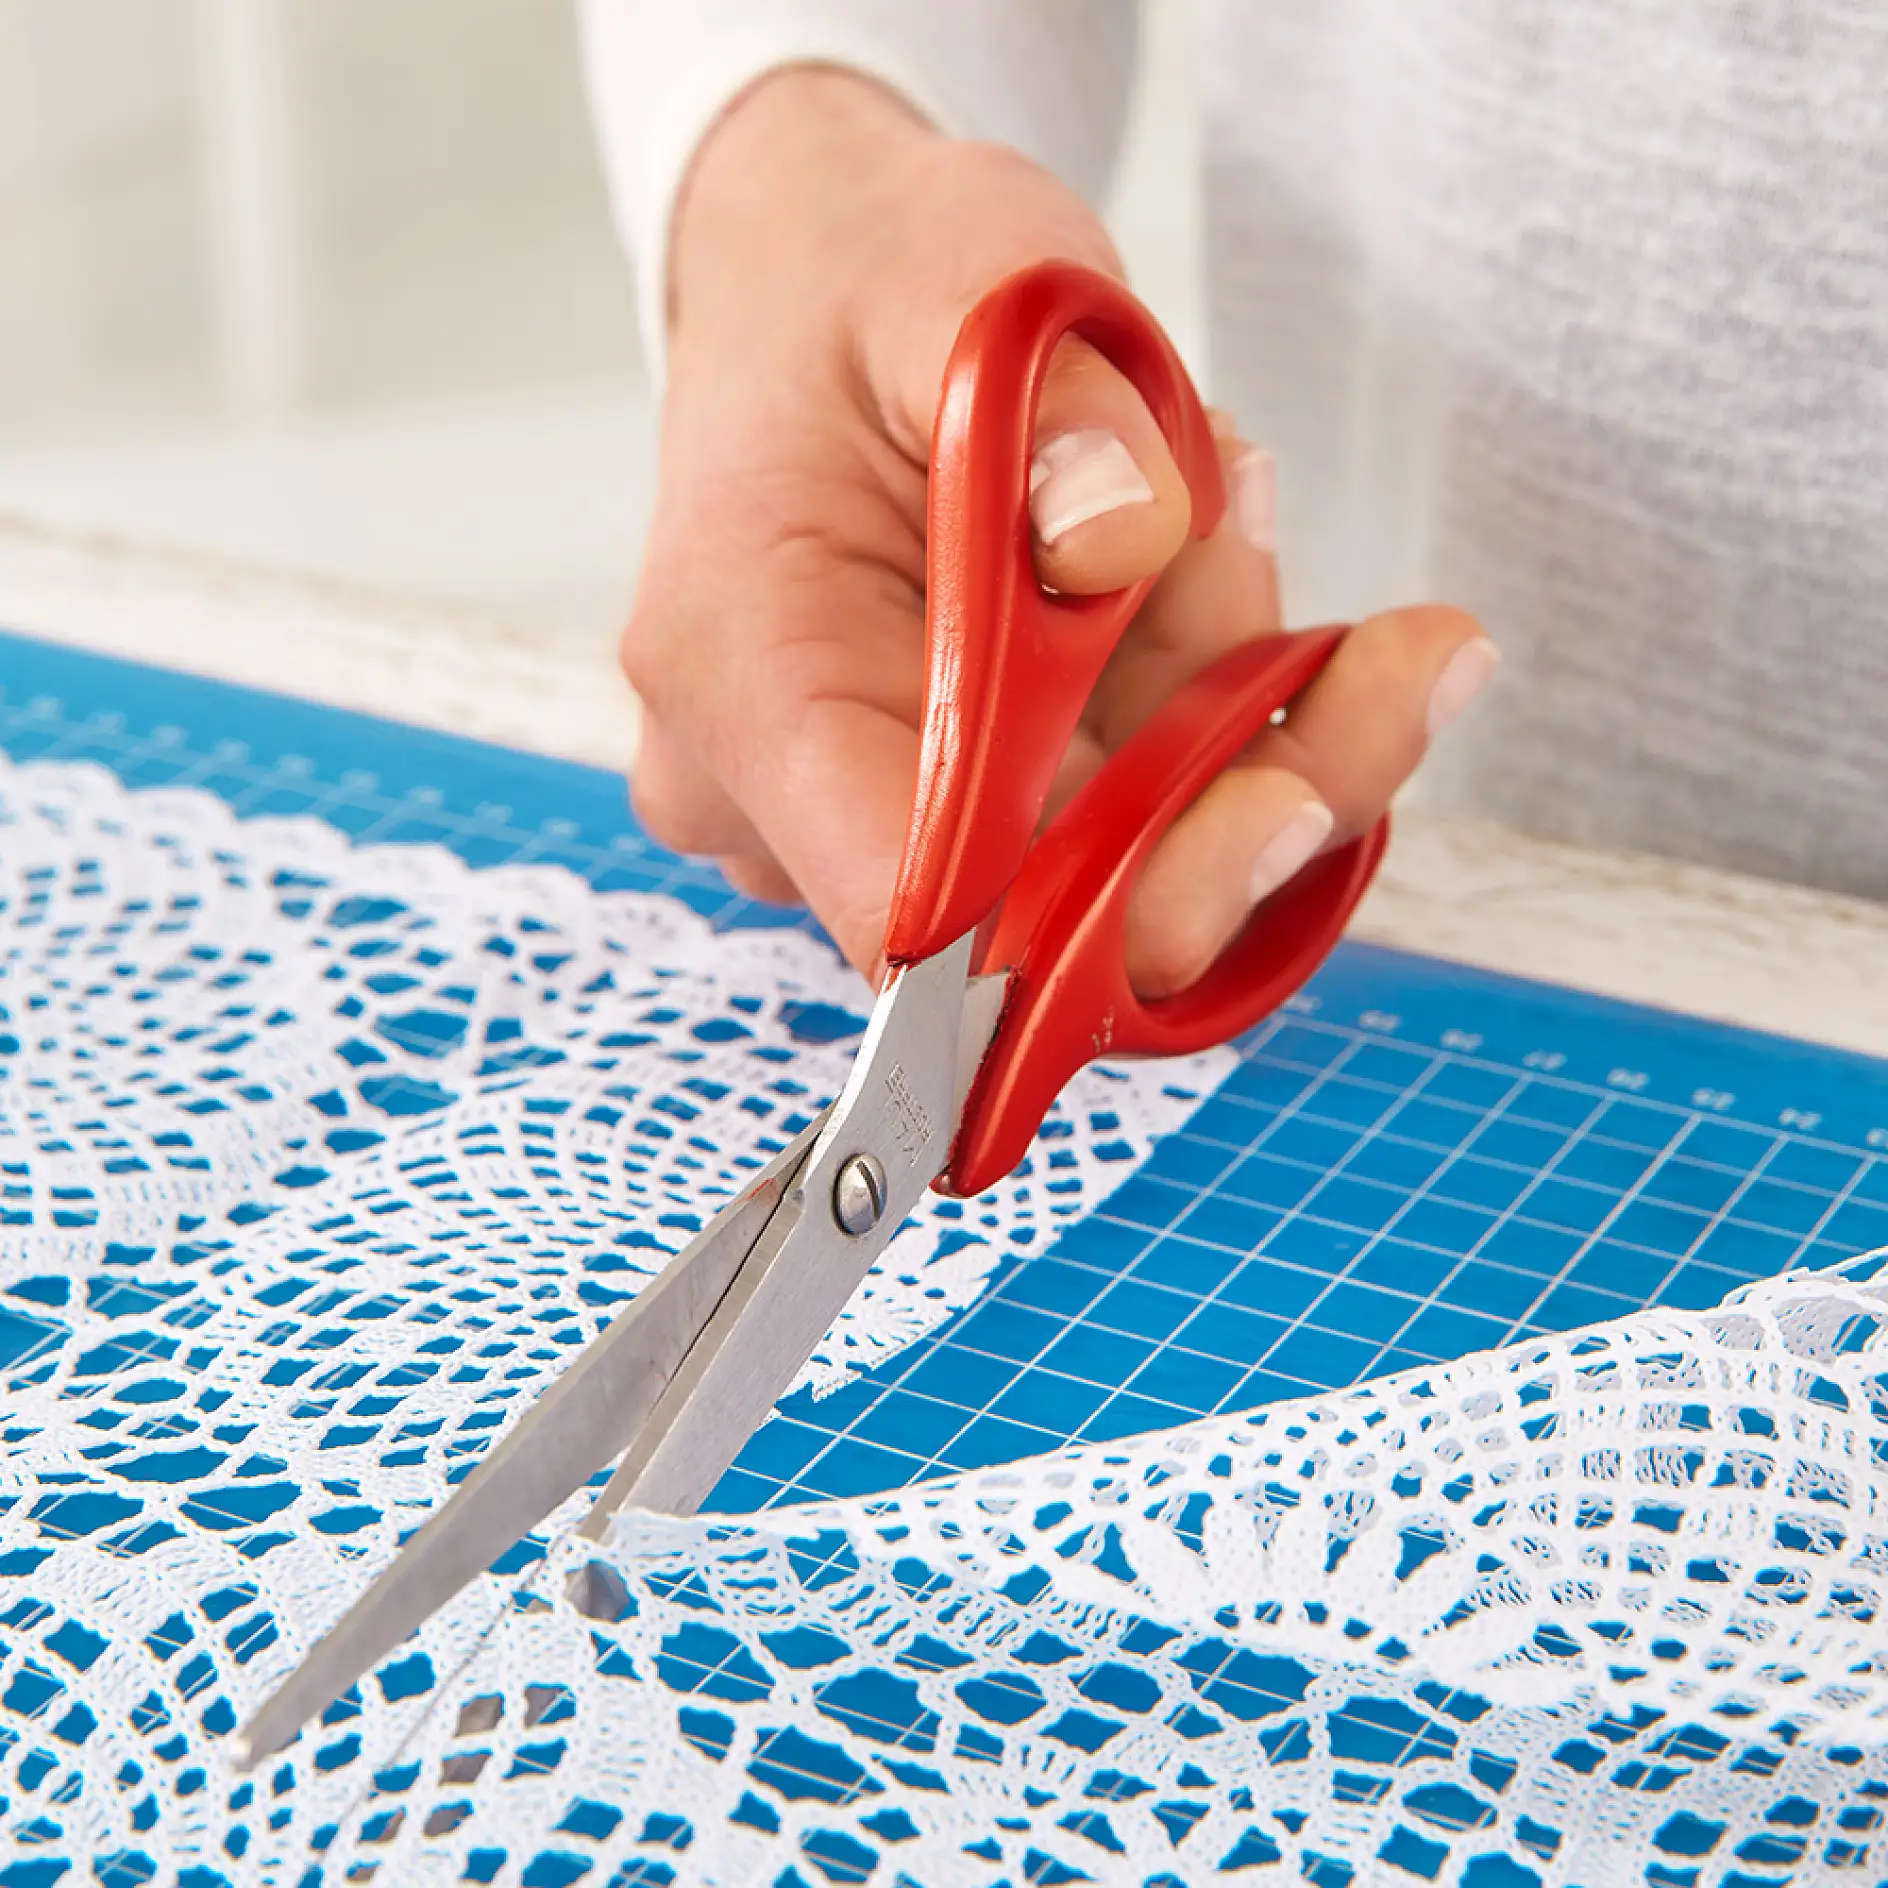 Cutting out the DIY lace window treatment with scissors